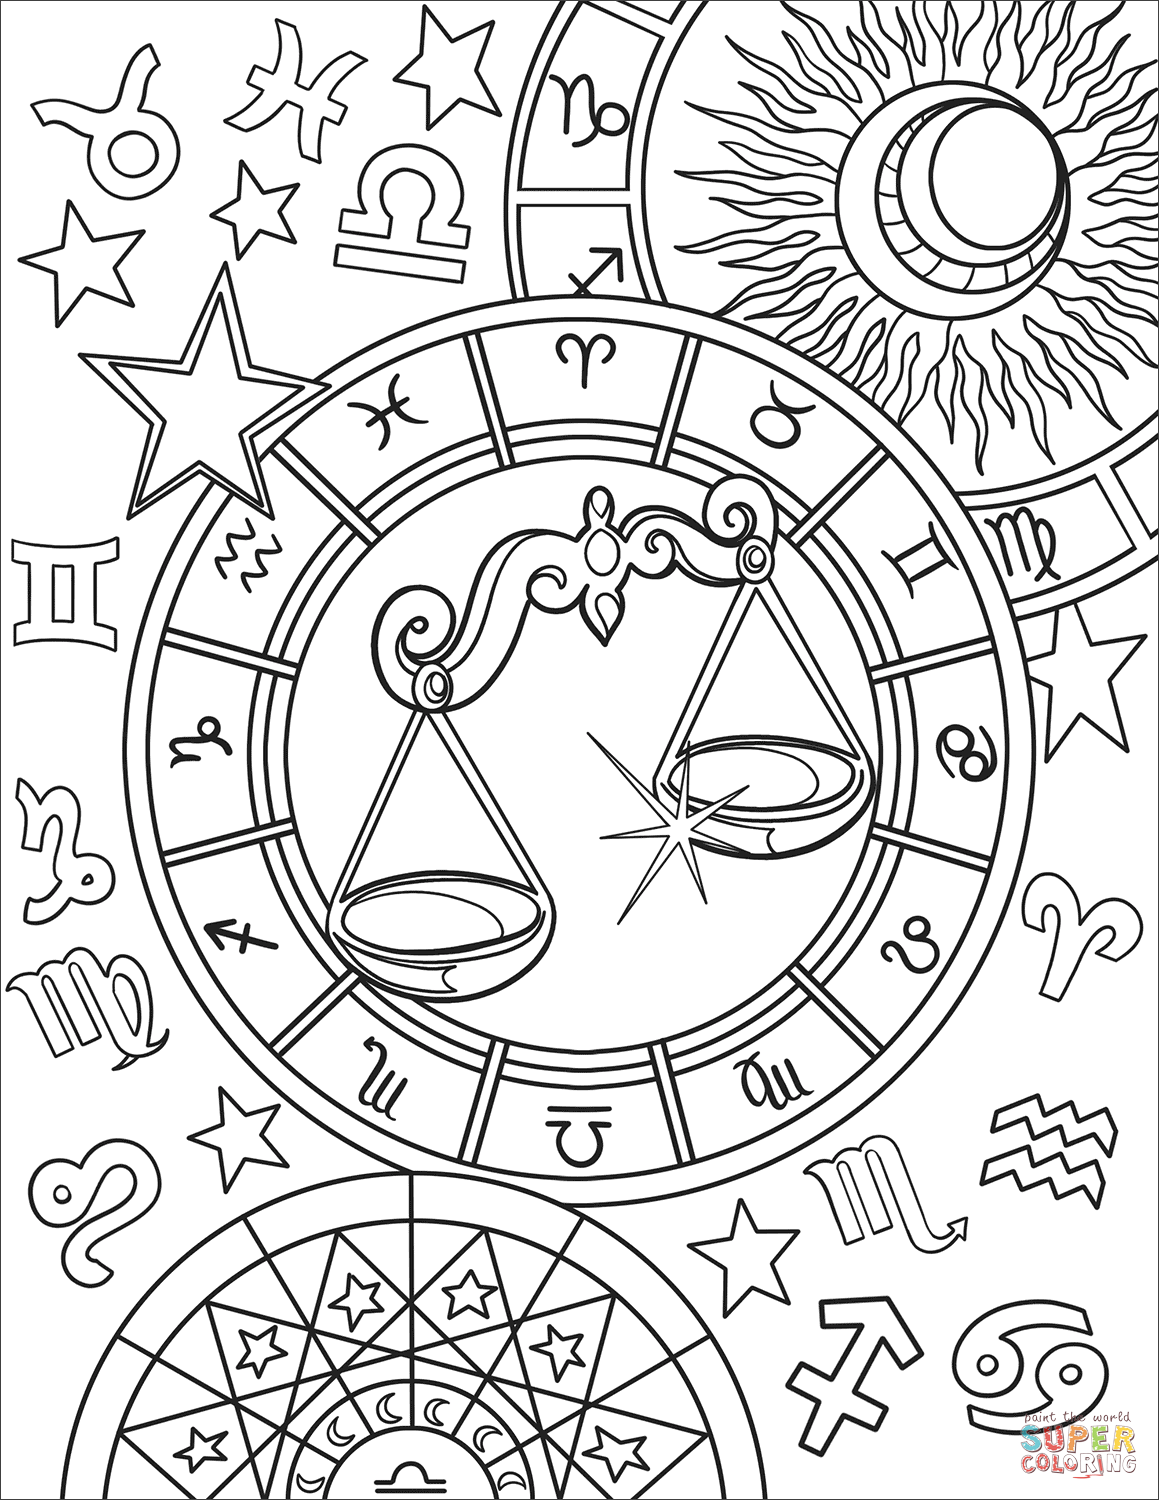 Zodiac Coloring Pages for Adults